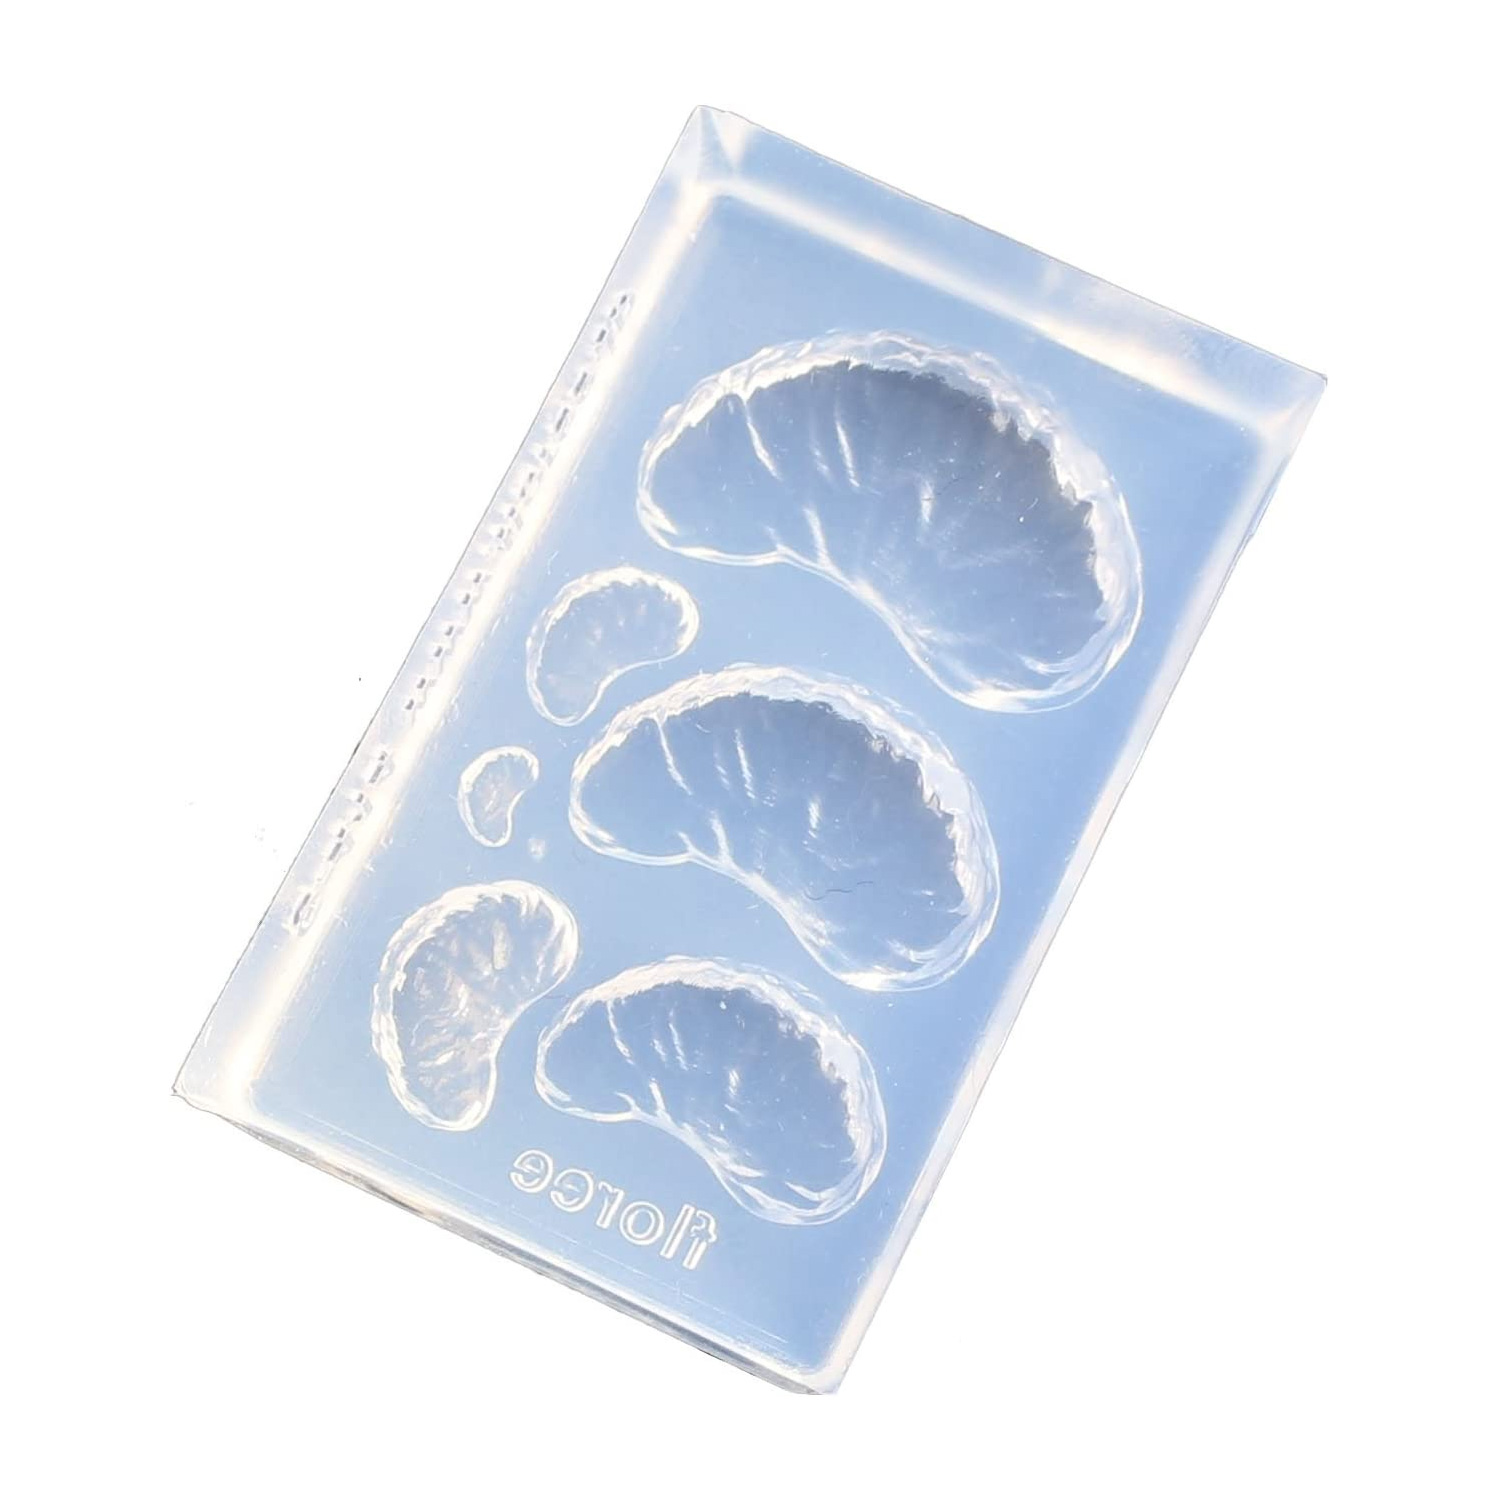 KAM-REJ-414 Resin Crafting Silicone Mold (pcs)